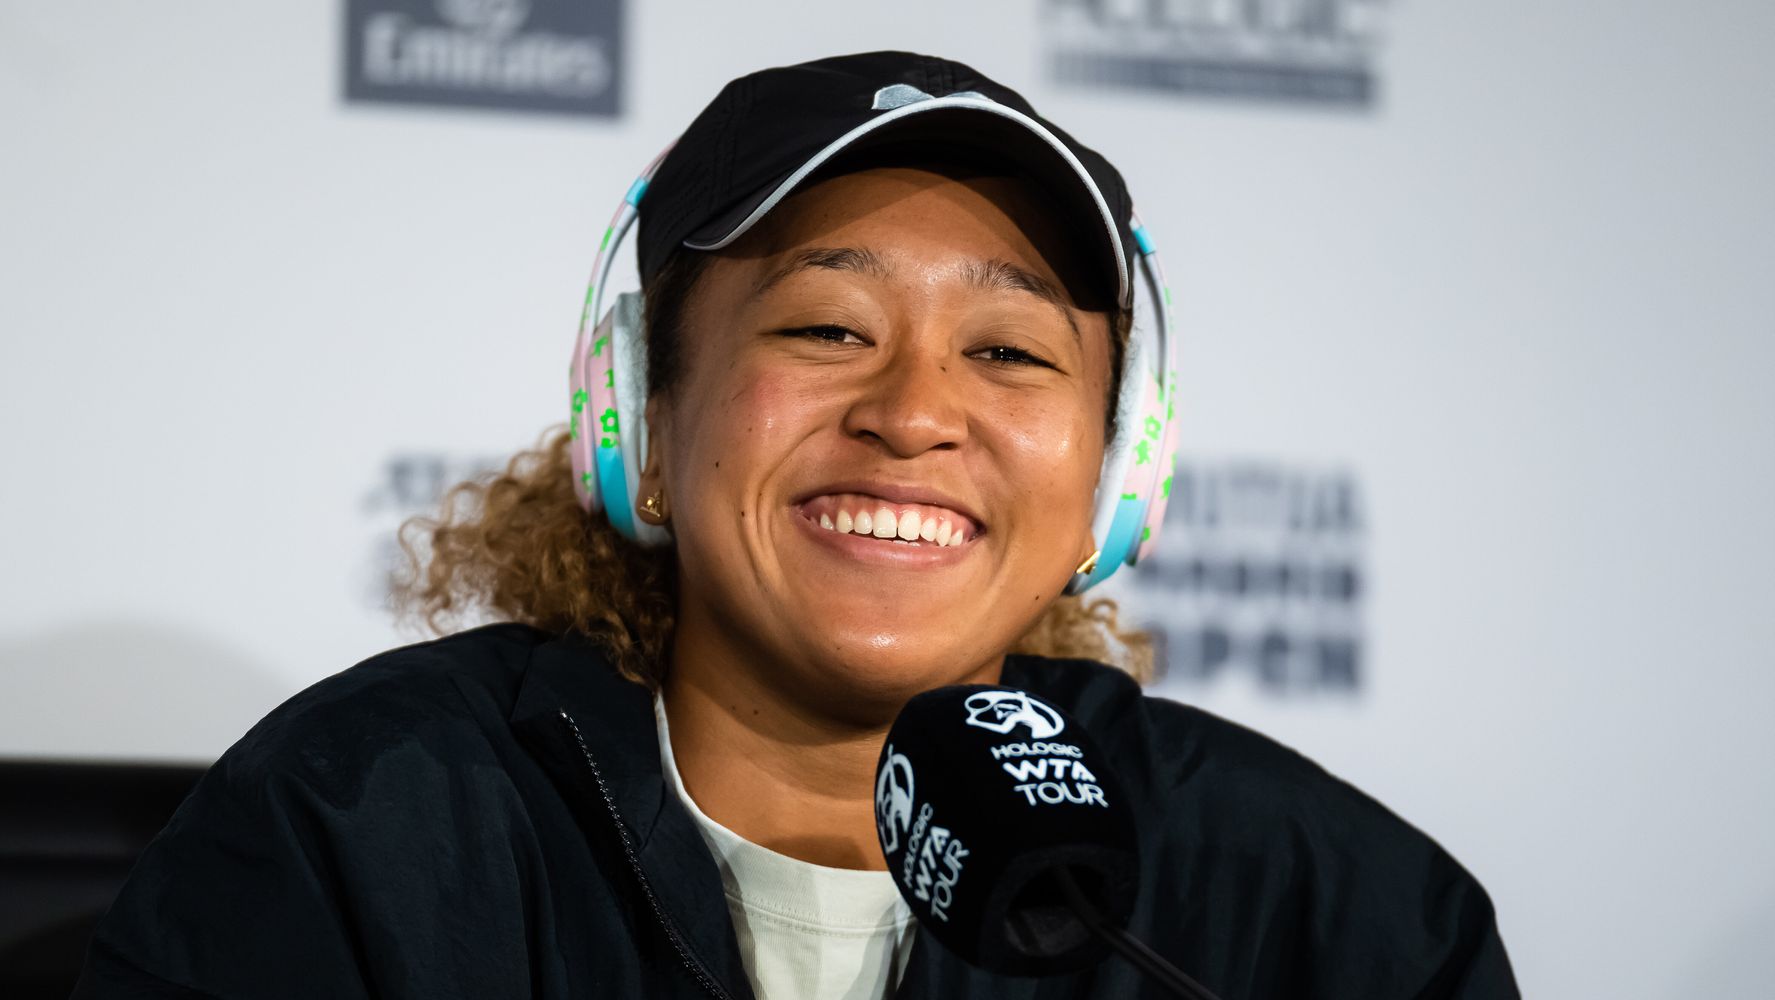 Naomi Osaka Gives Birth to Baby Girl With Rapper Cordae